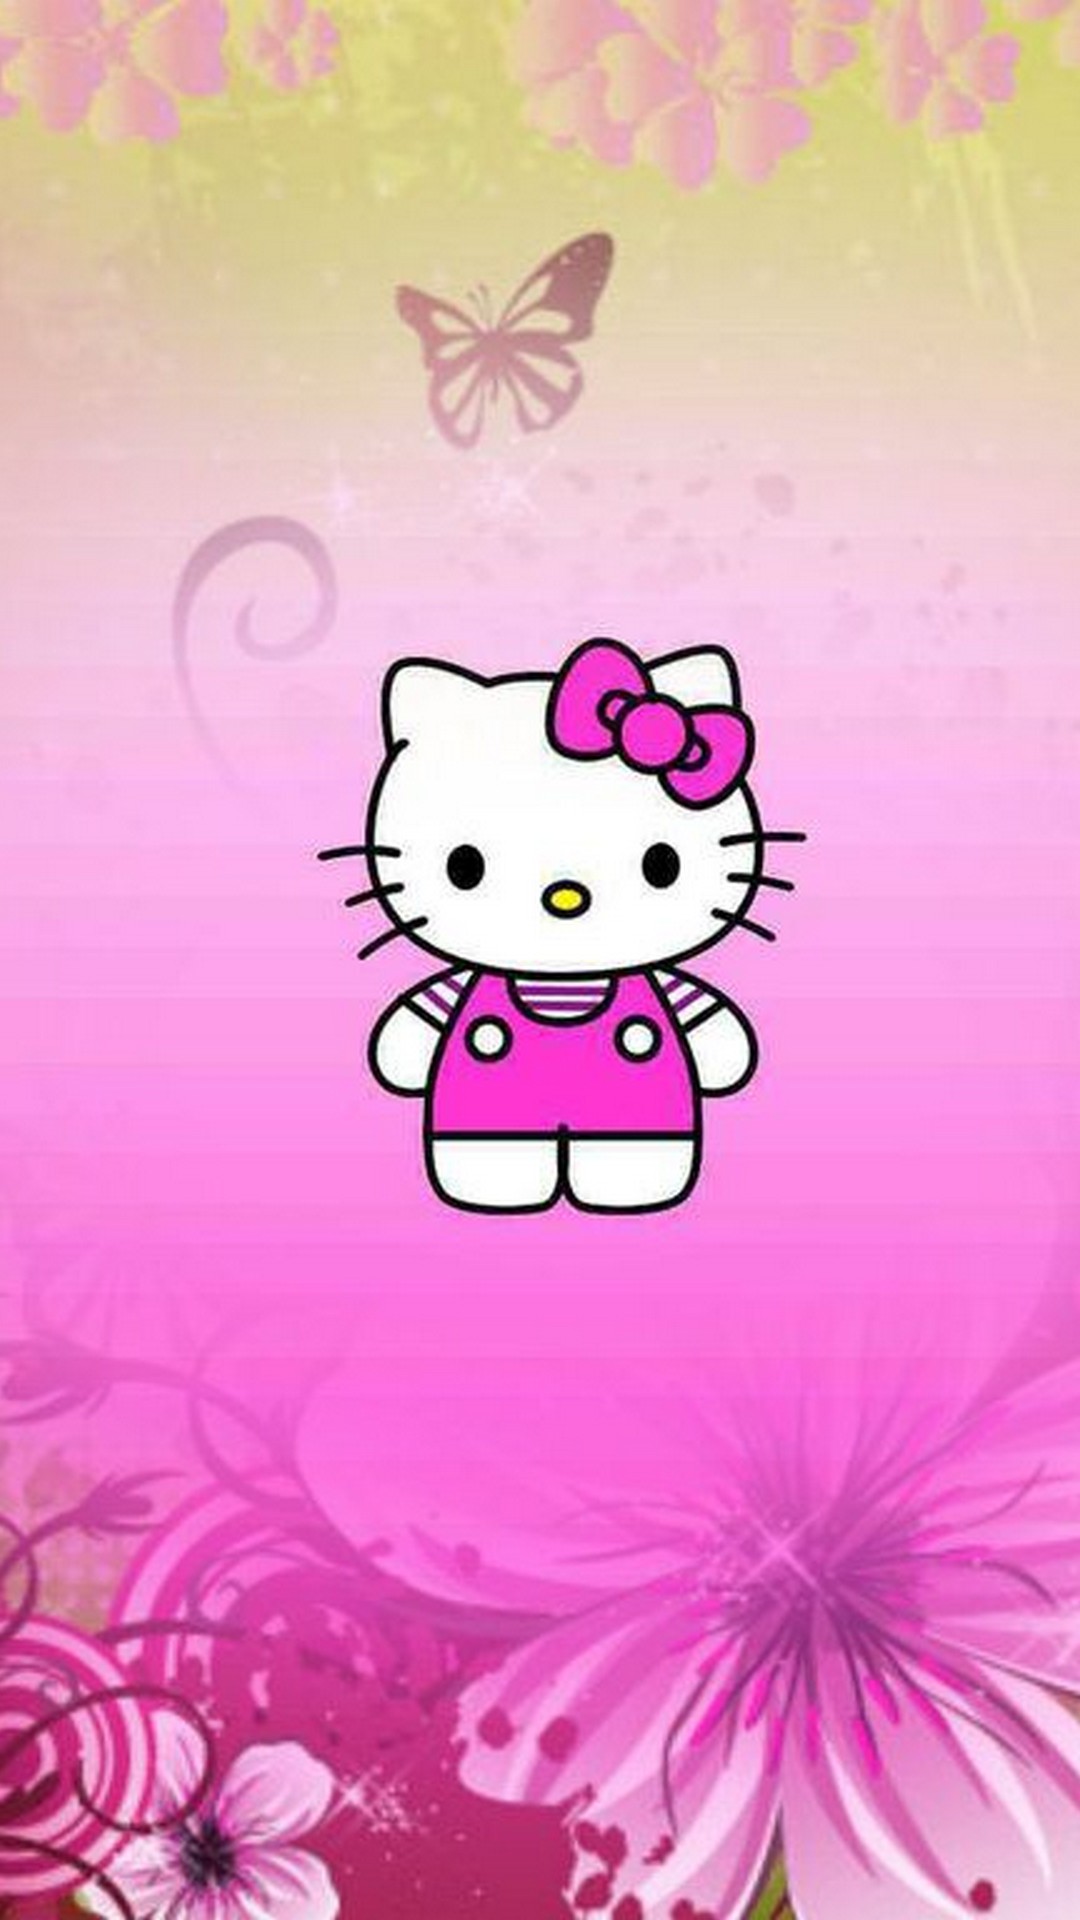 Hello Kitty Wallpaper Android with resolution 1080X1920 pixel. You can make this wallpaper for your Android backgrounds, Tablet, Smartphones Screensavers and Mobile Phone Lock Screen